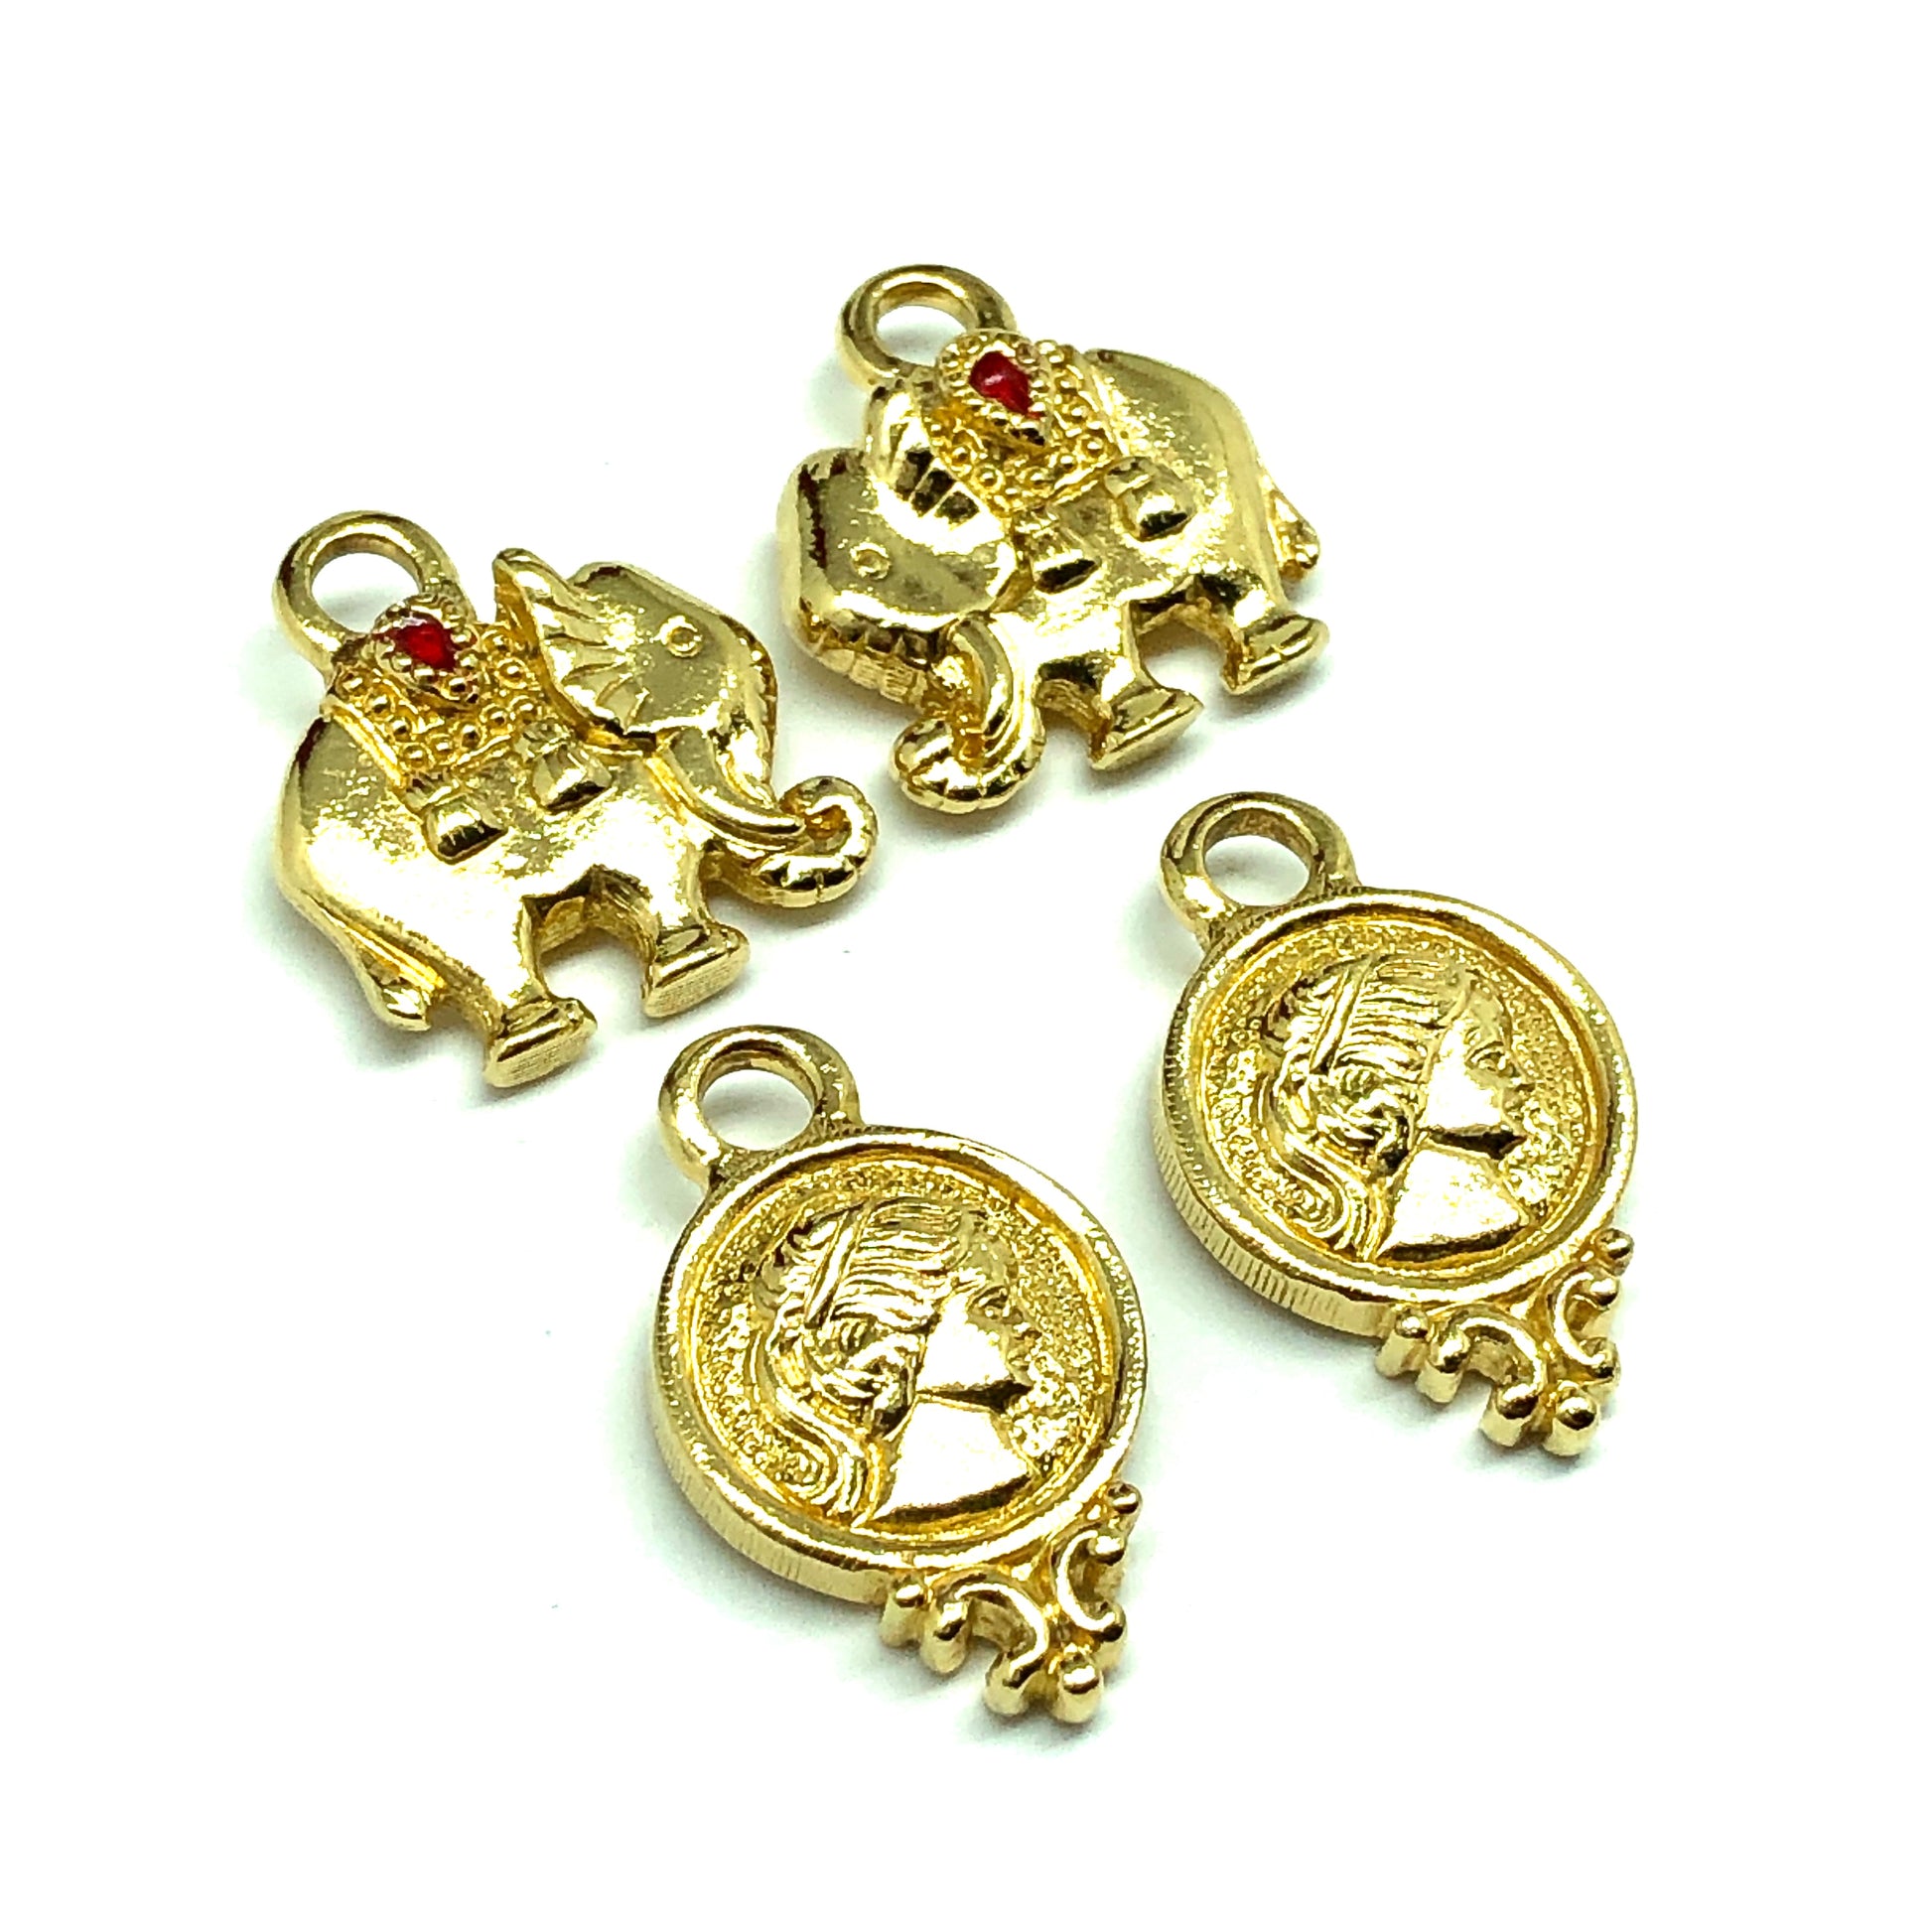 Charms & Pendants | 4 Charm Lot Gold Elephant and Woman Head Coin Charms | Jewelry Findings